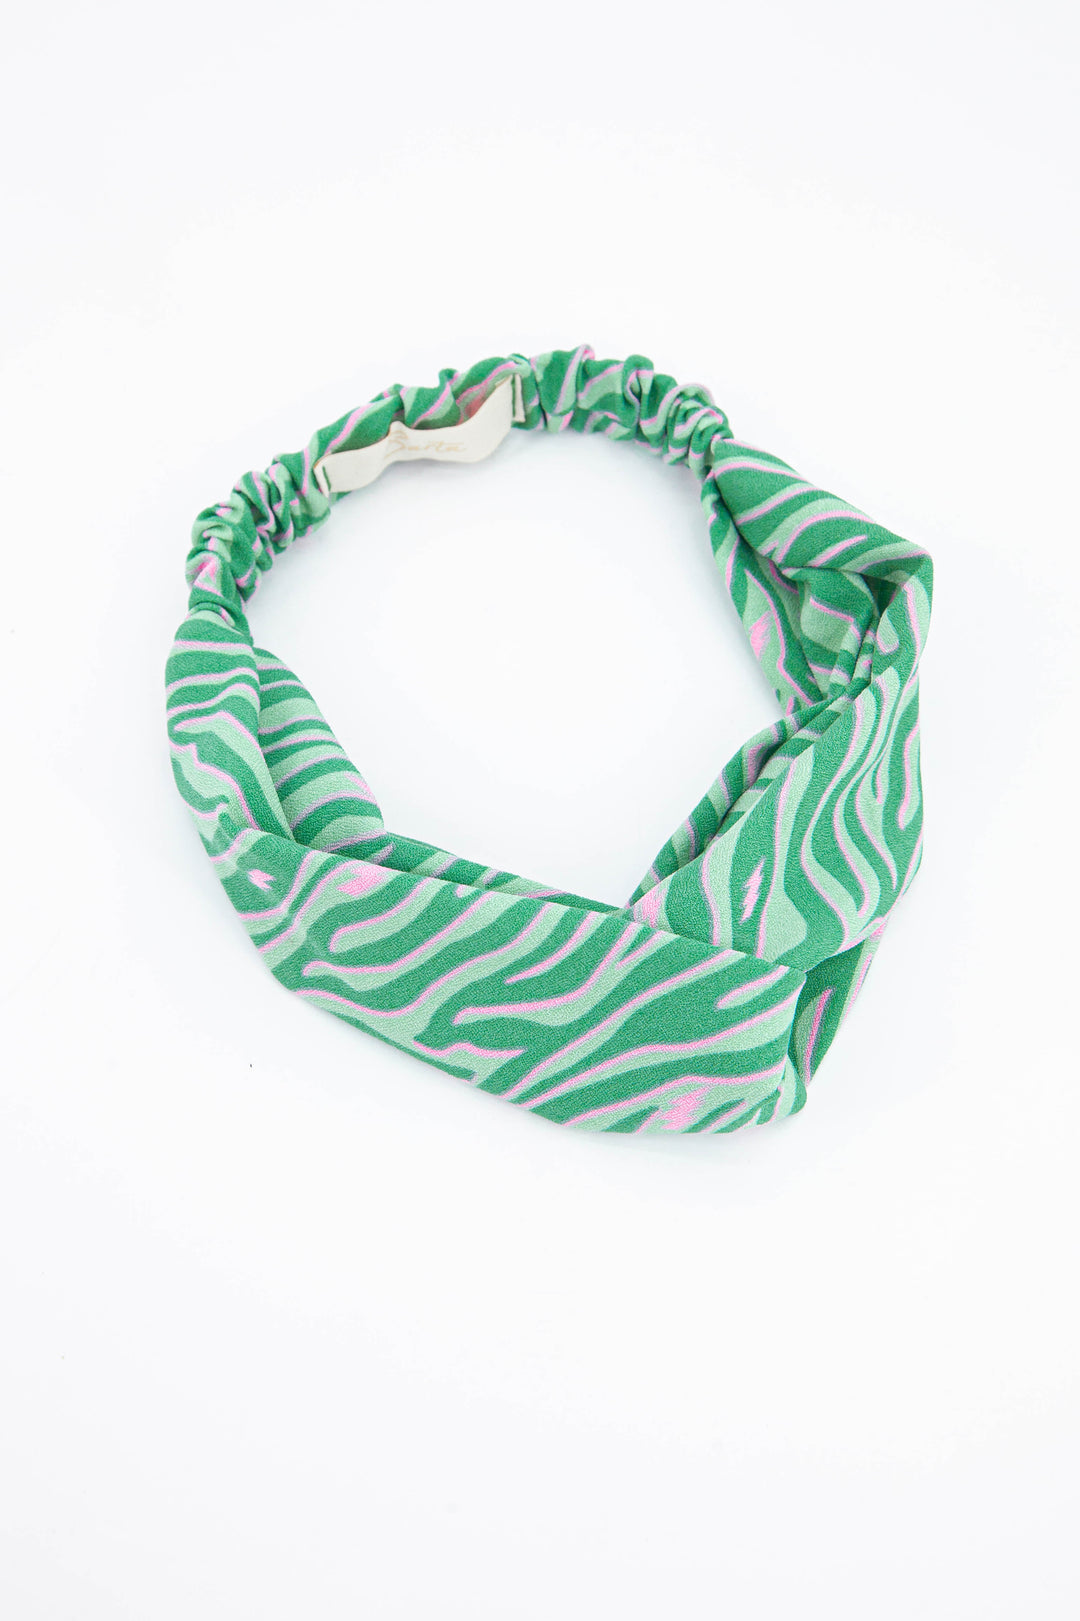 green and pink zebra print fabric head band with twisted front and elasticated back